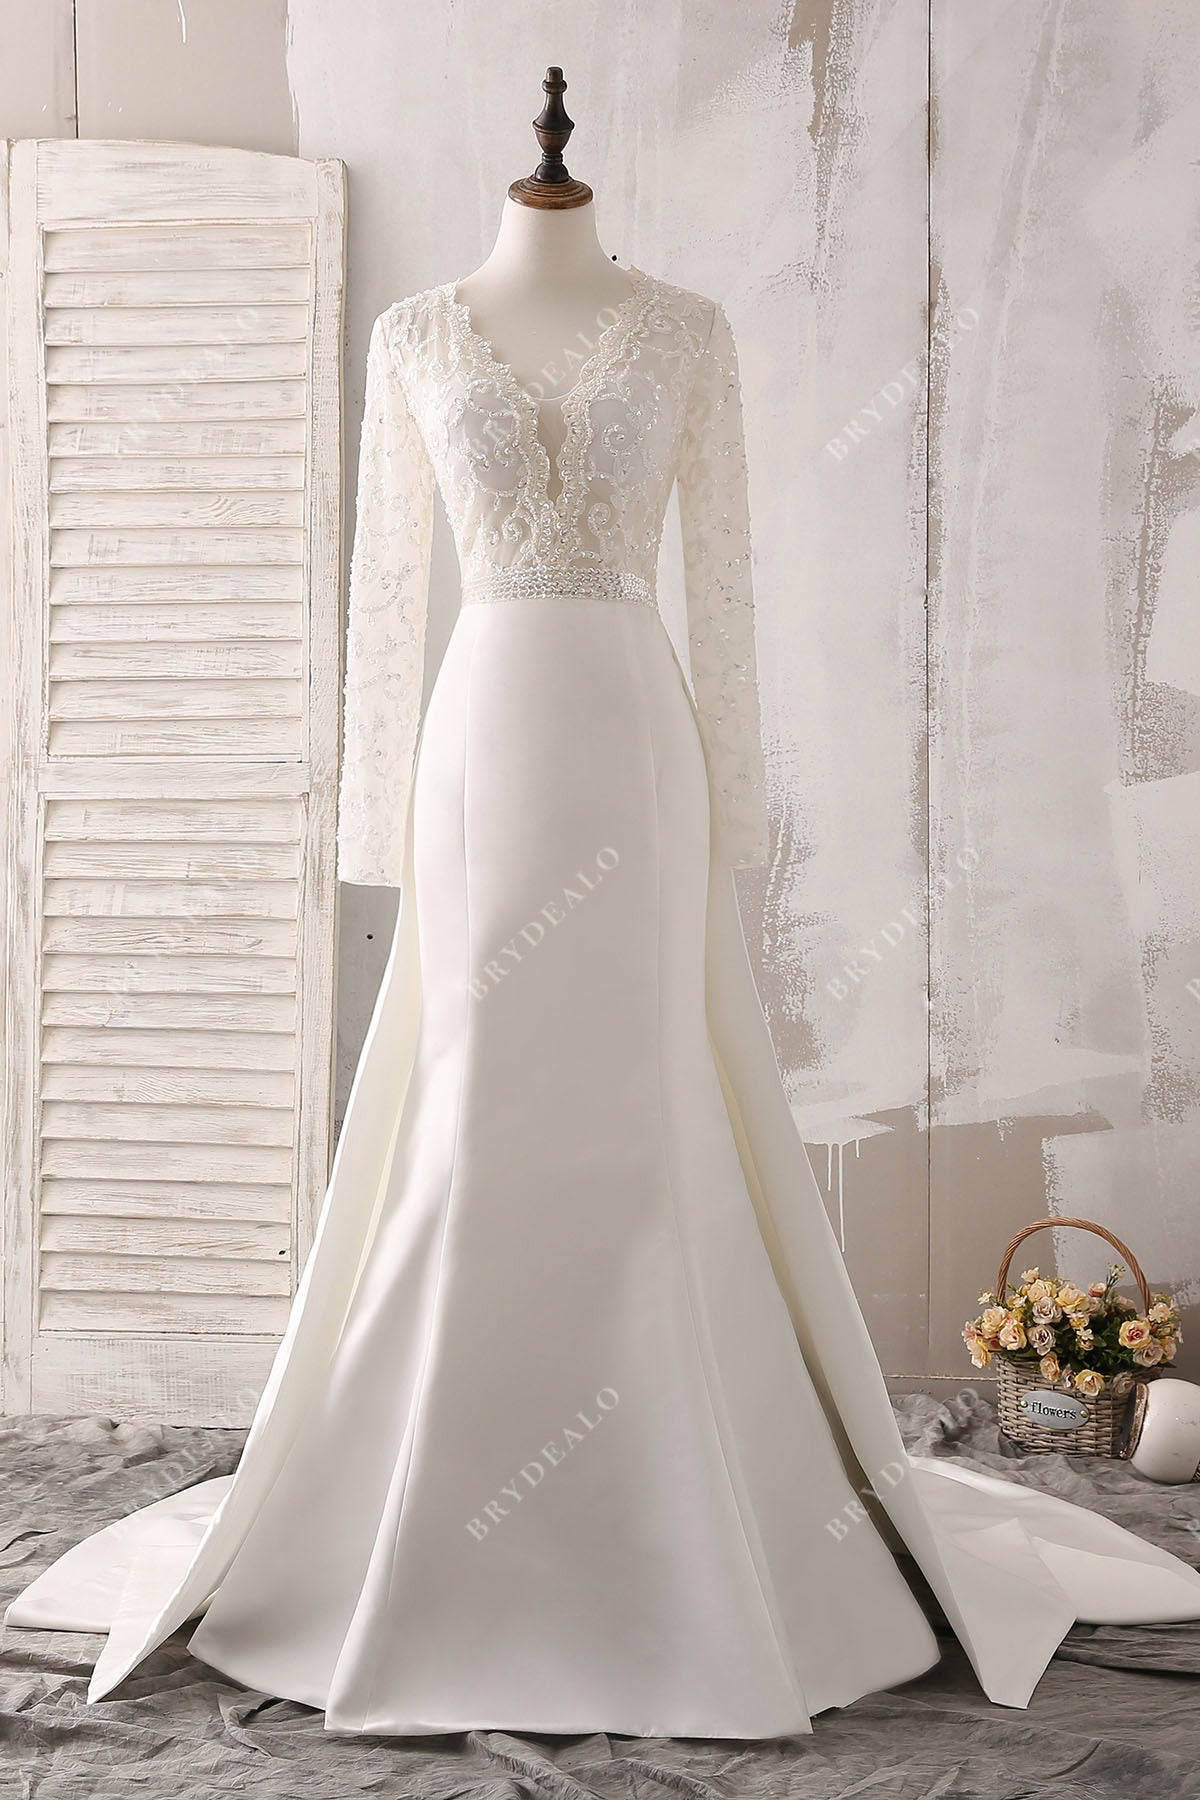 Vintage Lace Appliqued Satin Overskirt Wedding Dress With Cape 2020  Collection From Dresstop, $144.24